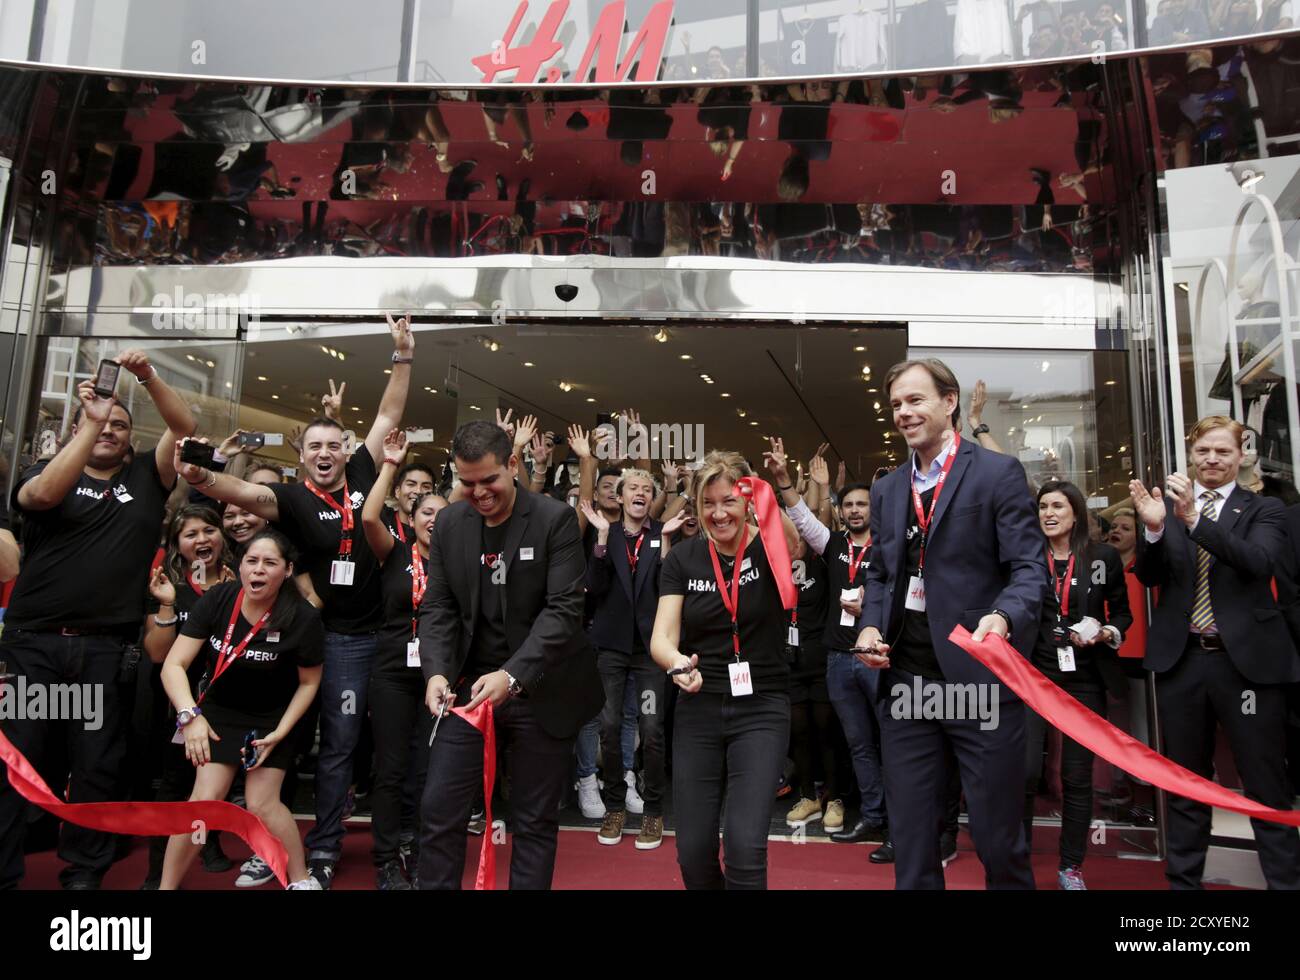 Hennes & Mauritz (H&M) CEO Karl-Johan Persson (R), accompanied by other  managers, cuts the ribbon to inaugurate the first H&M store in Peru, at the  Jockey Plaza mall in Lima, May 9,